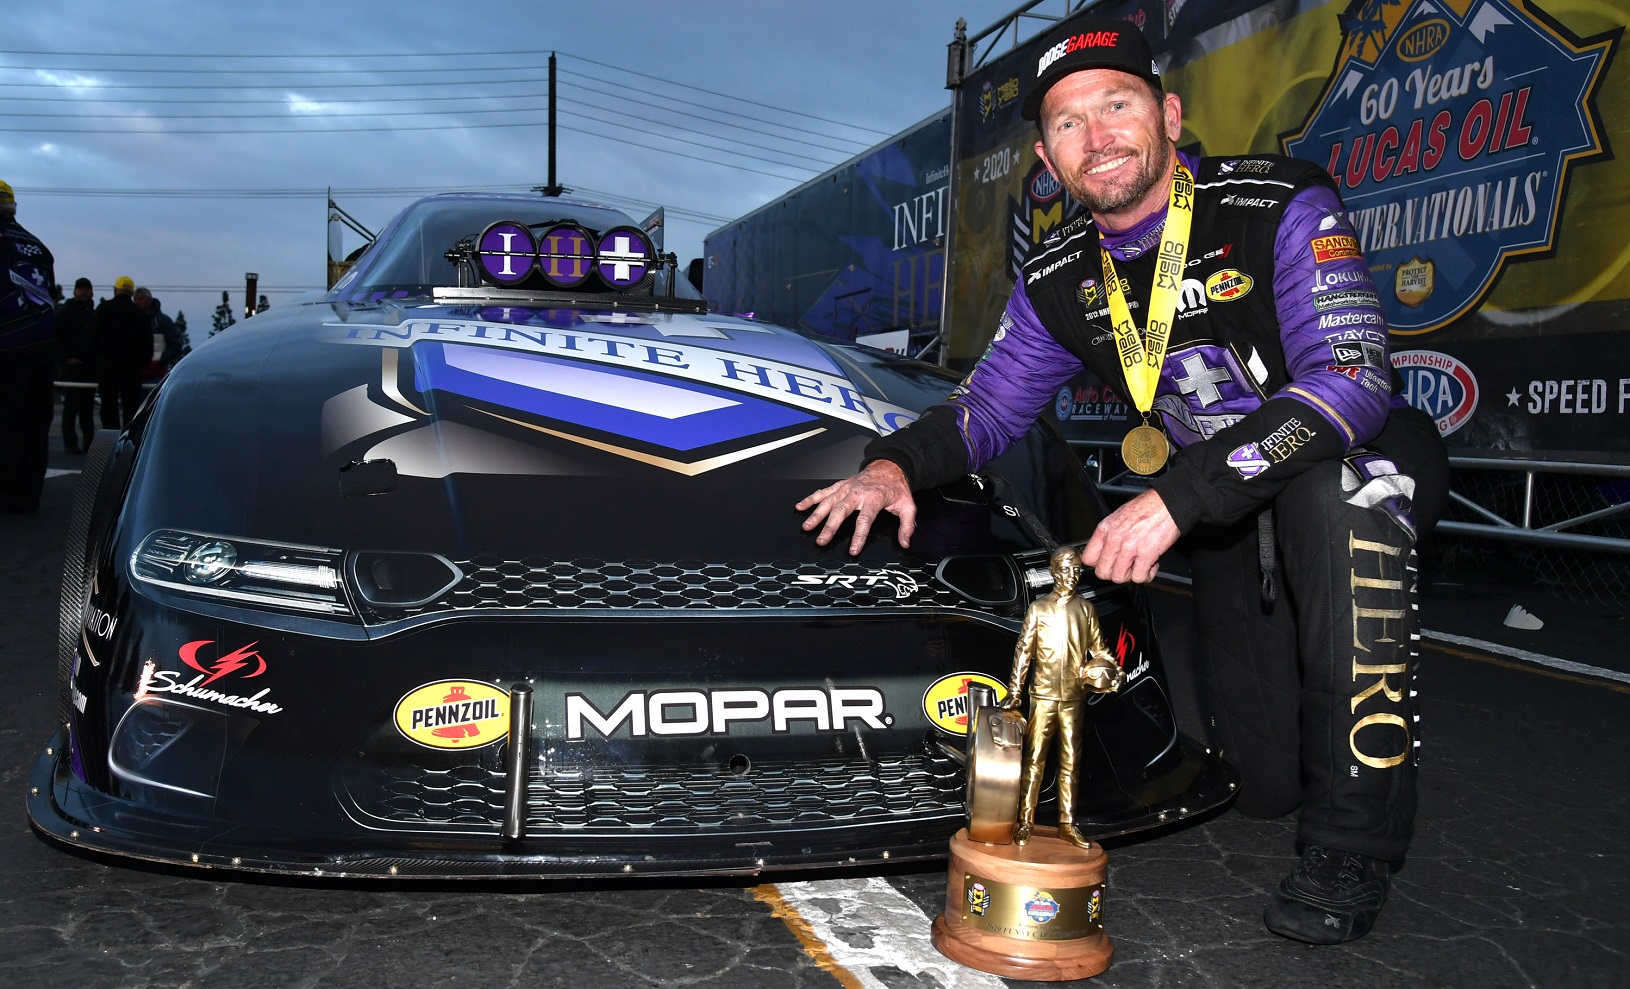 Fast Start for “Fast Jack” and Mopar<sub>®</sub> Dodge//SRT<sup>®</sup> with Funny Car National Event Win at NHRA Winternationals to Kick-off 2020 Season